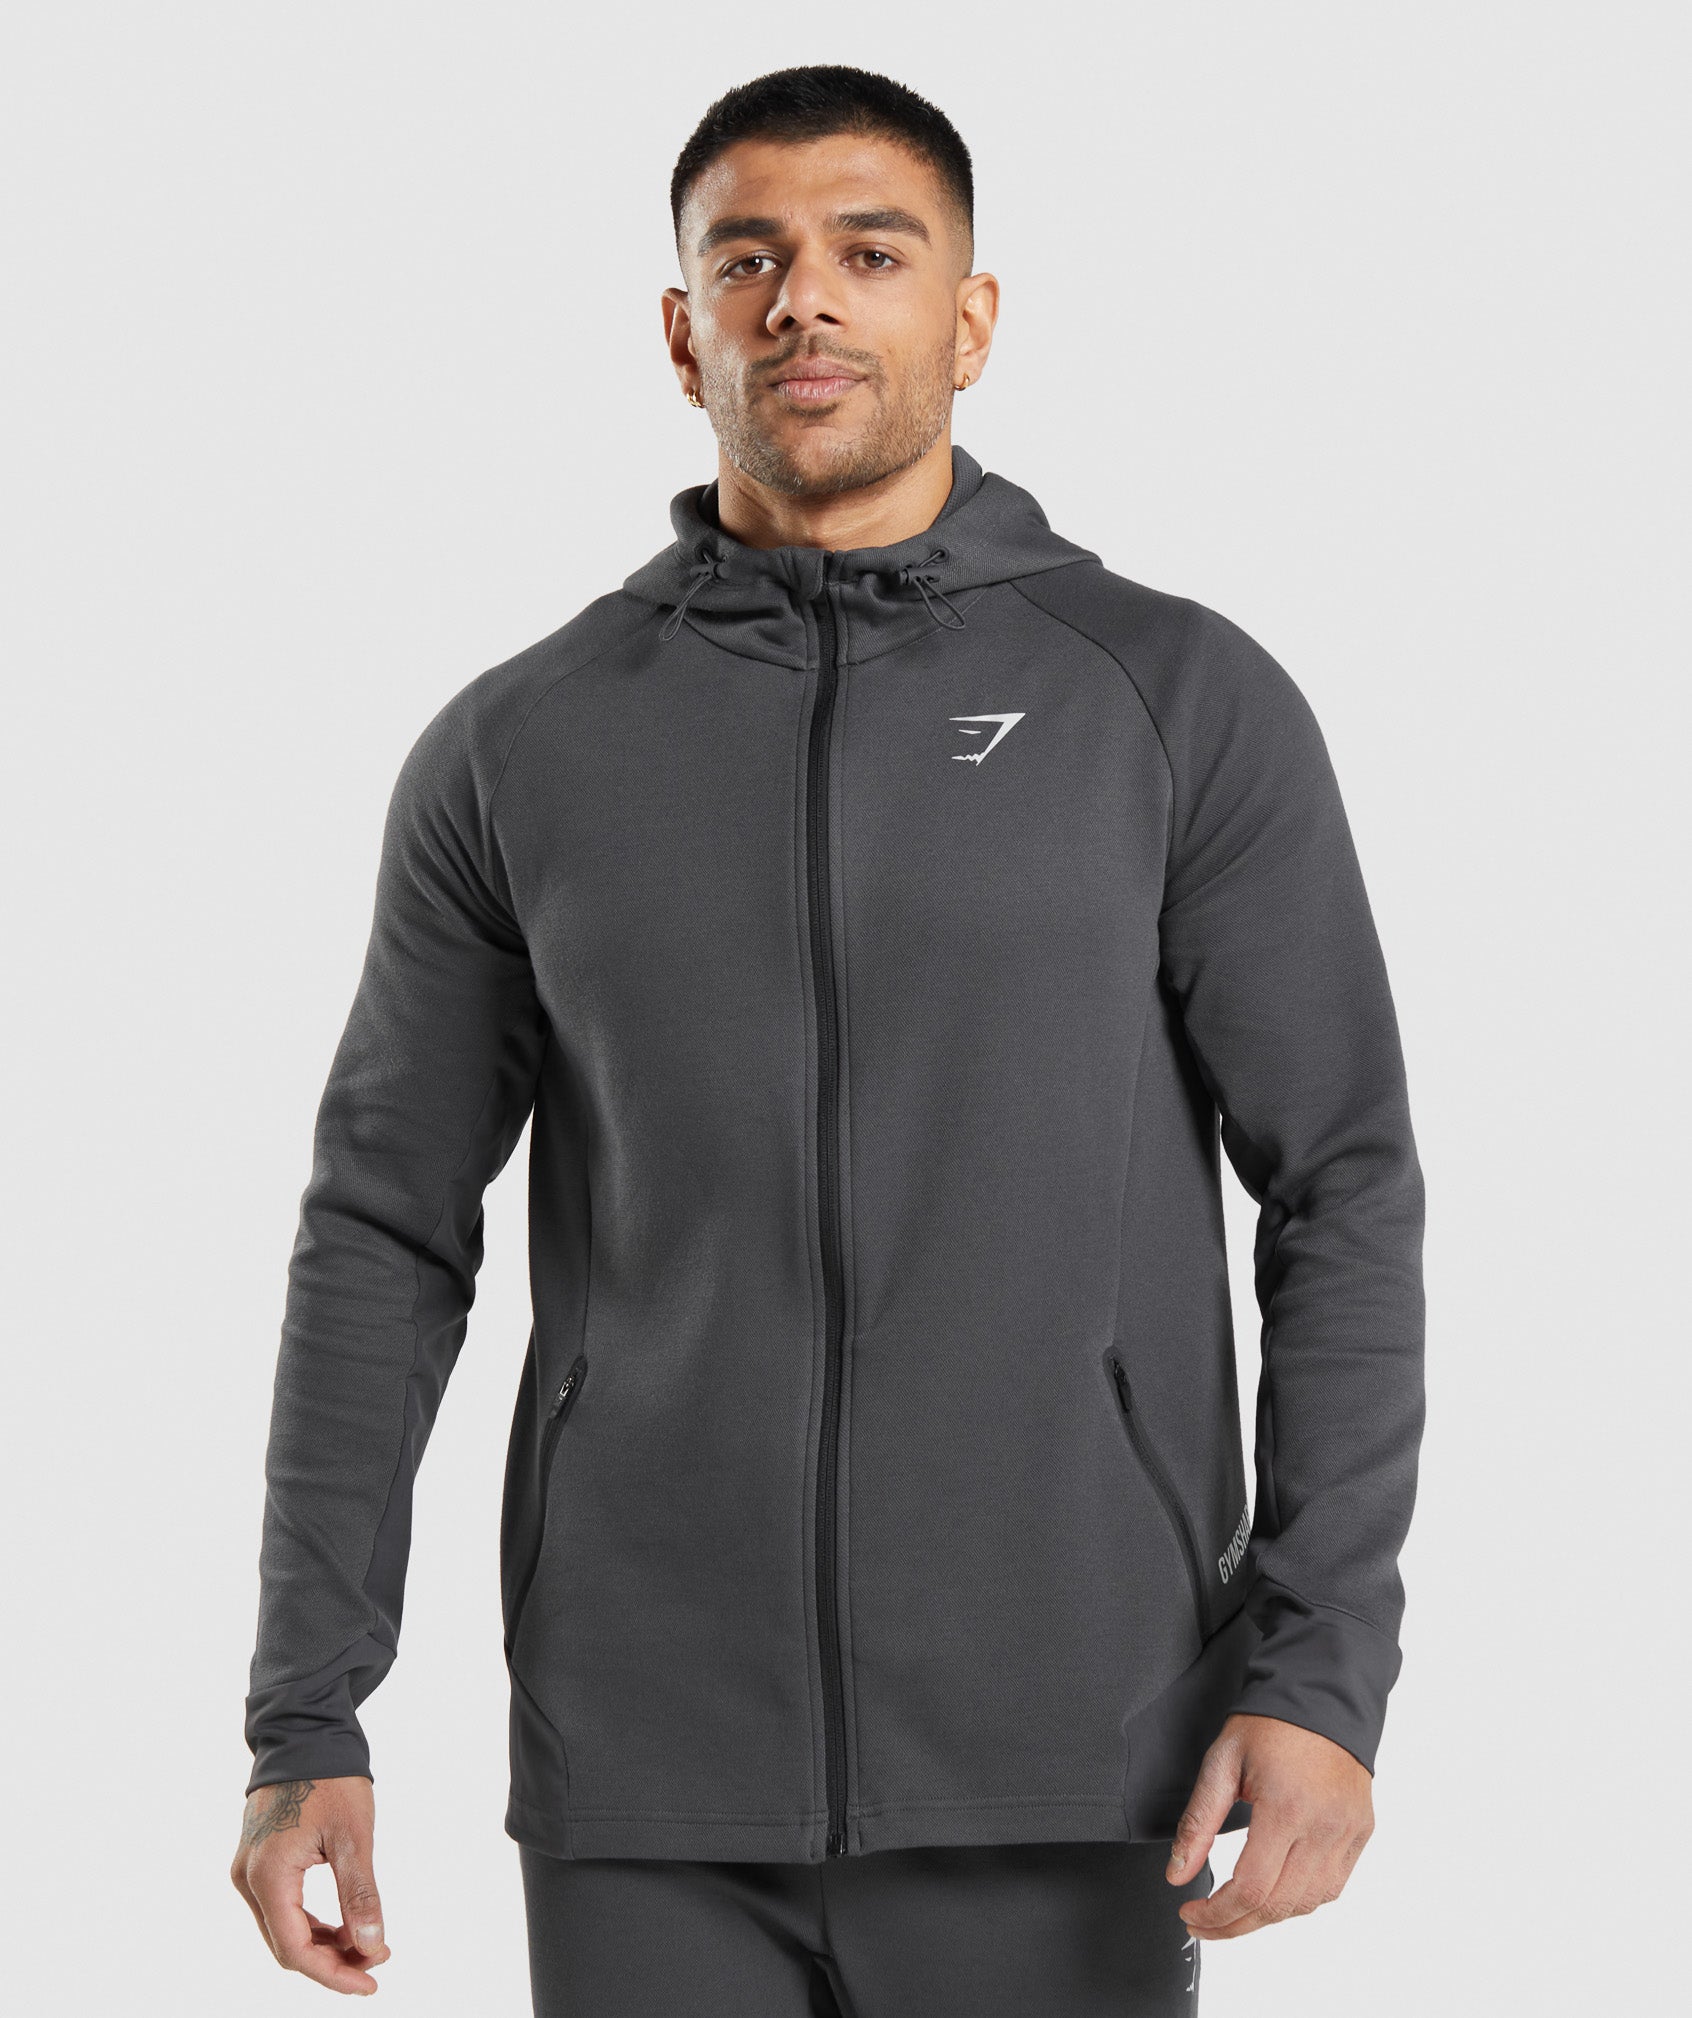 Apex Technical Jacket in Onyx Grey - view 1